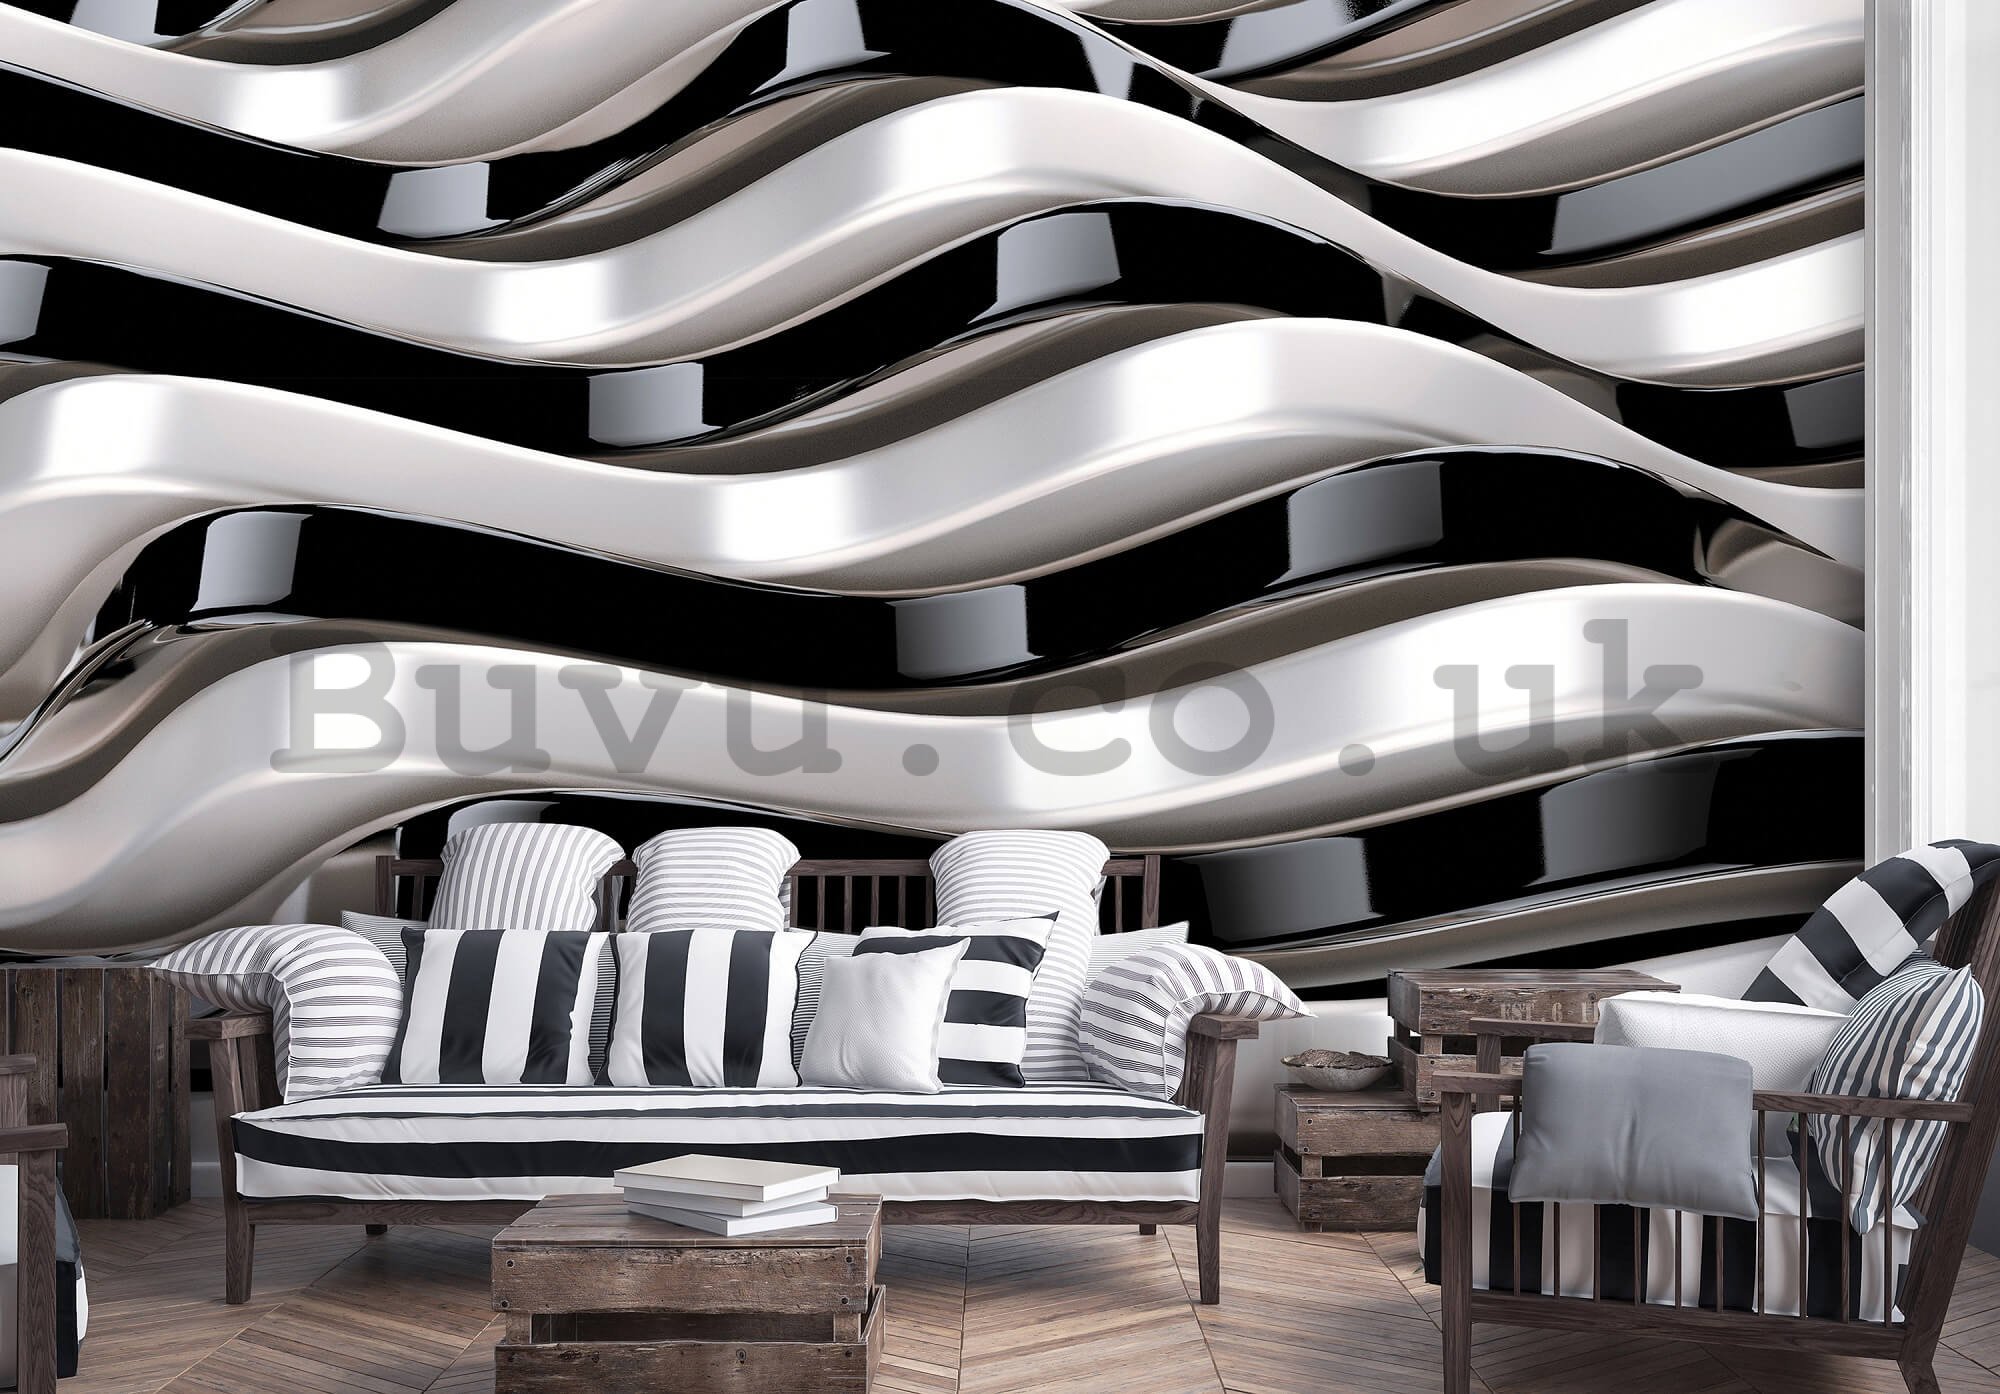 Wall mural: Wavy abstraction - 254x368 cm